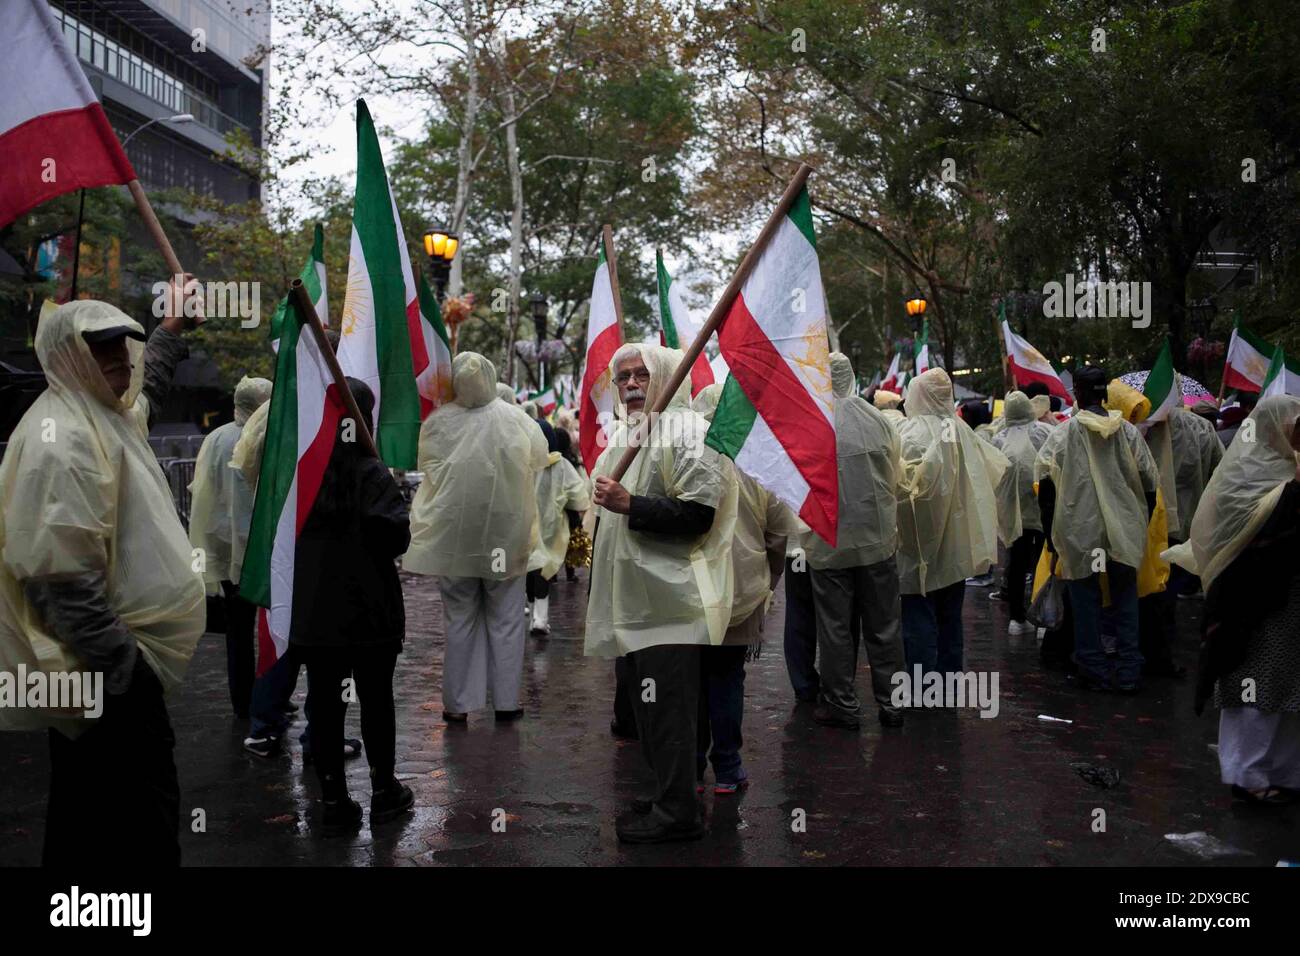 Iranian Americans and other supporters rally against the President of Iran, Hassan Rouhan,i outside the United Nations complex in New York City, NY, USA, on September 25, 2014. Rouhani addressed the UN General Assembly today as demonstrators outside protested what organizers call the Rouhani regime's poor human rights record, sponsorship of terrorism, and deceptive nuclear negotiation tactics. Photo by Ariana Drehsler/ABACAPRESS.COM Stock Photo